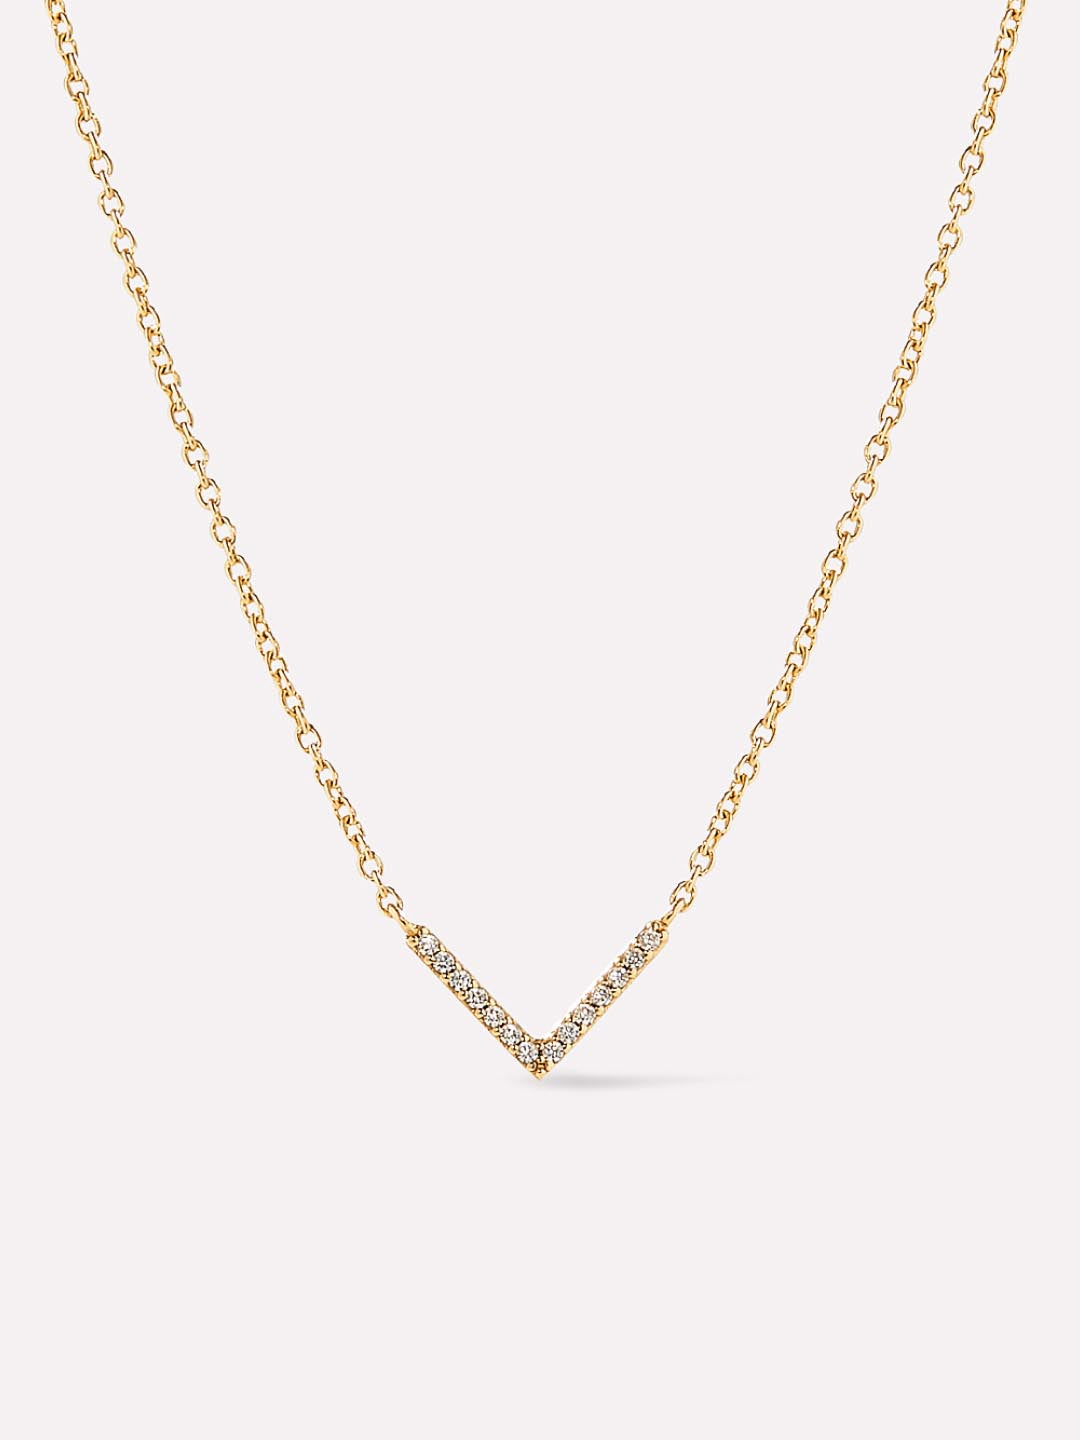 V-Necklace - Vida | Ana Luisa | Online Jewelry Store At Prices You'll Love